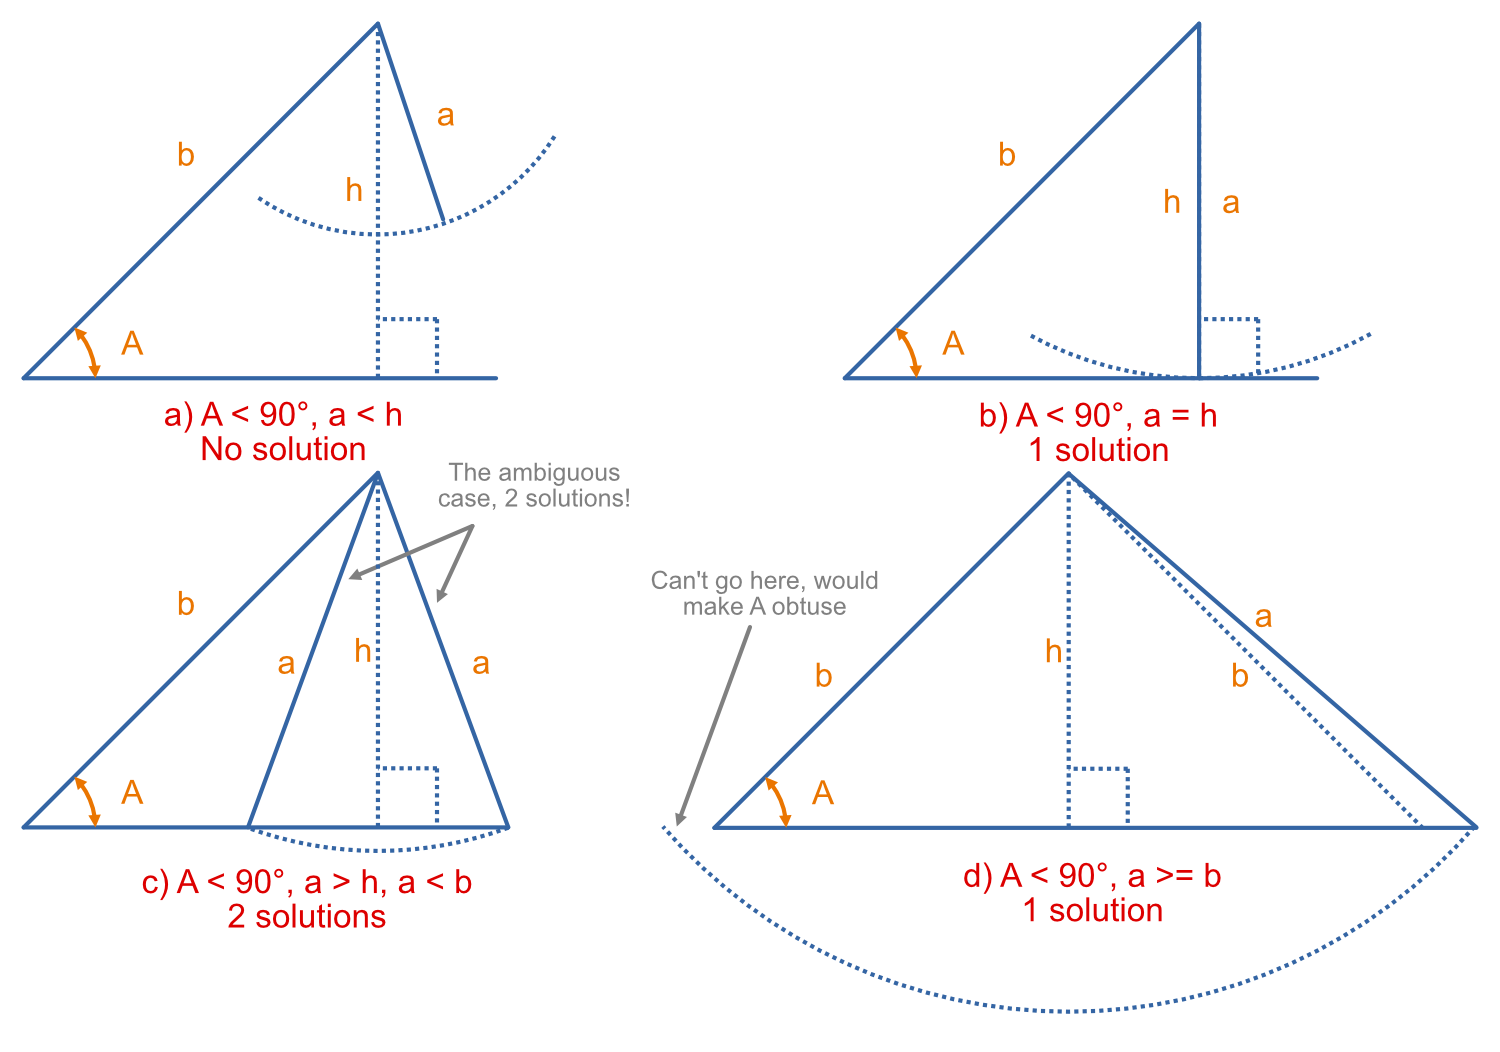 Diagram showing the situations when you know two sides of the triangle and 1 opposite angle. c) is the ambiguous cases which has two possible solutions.